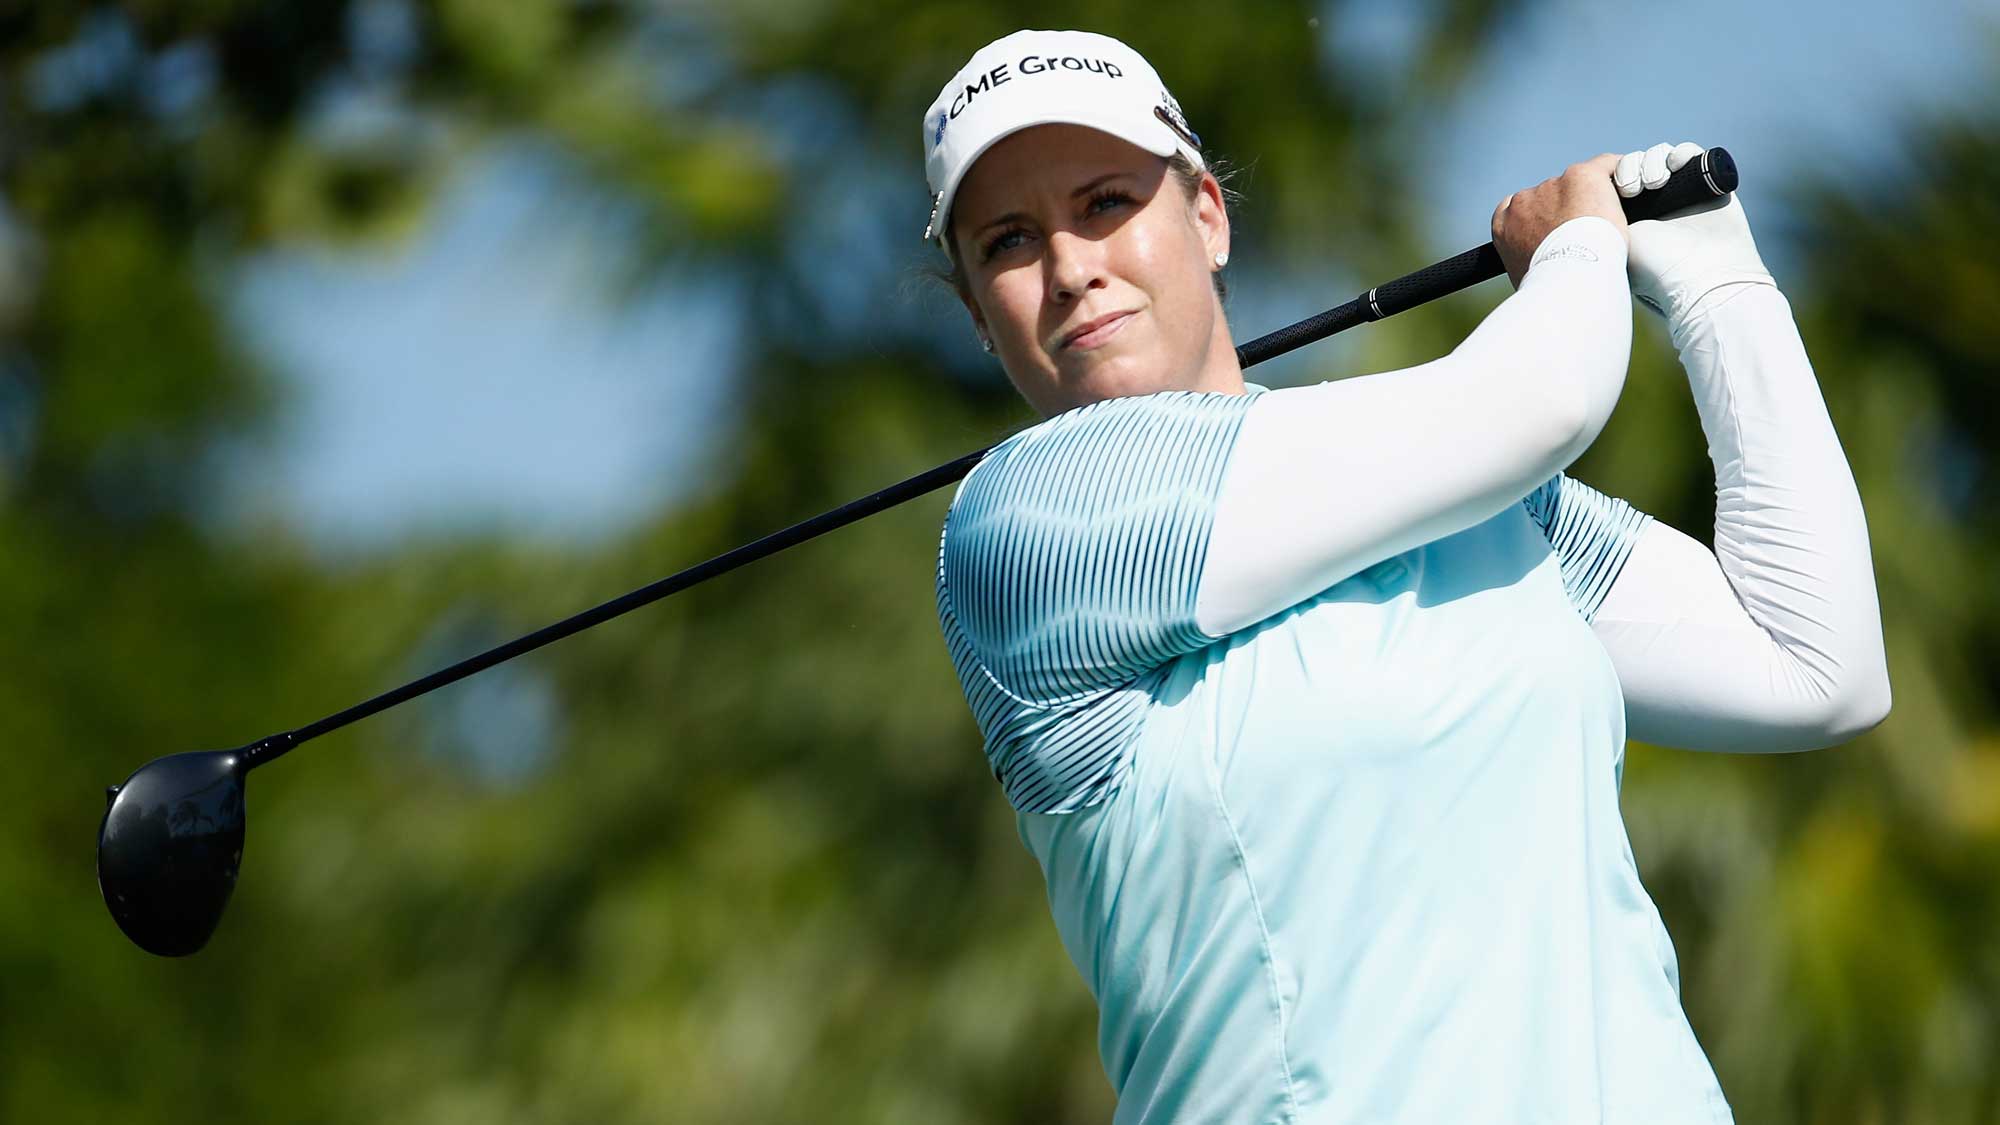 Brittany Lincicome hits her tee shot on the 4th hole during the final round of the Pure Silk Bahamas LPGA Classic